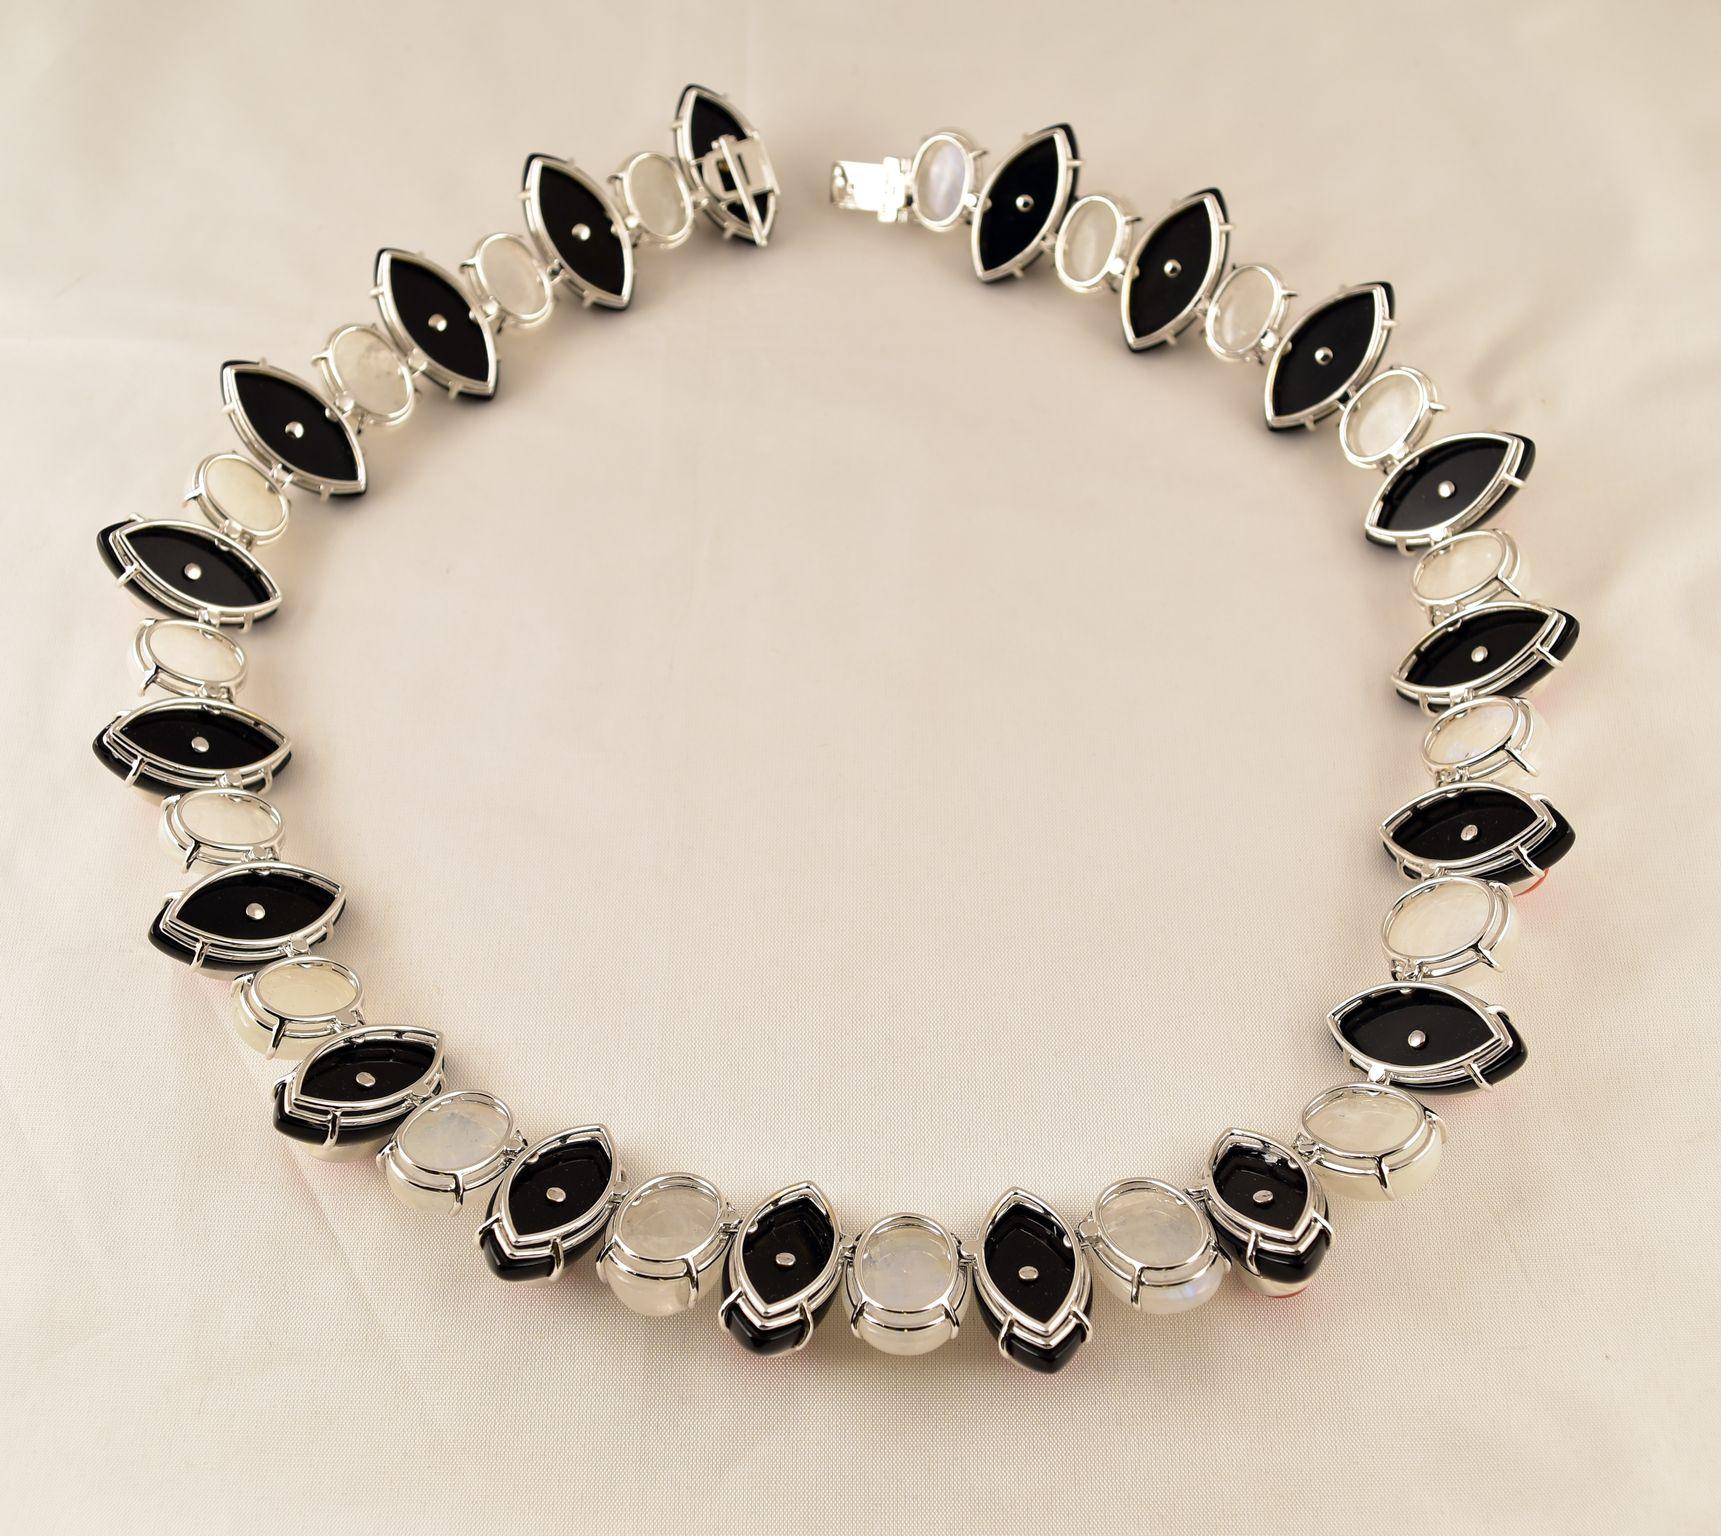 Simply Beautiful! Elegant and Finely detailed Moonstone (app. 367 total Carat weight), Coral (app. 539.6 total Carat weight), Black Onyx (app. 440 total Carat weight) Statement Necklace. Hand crafted in 18K white Gold; Signed: TONY DUQUETTE 18K;